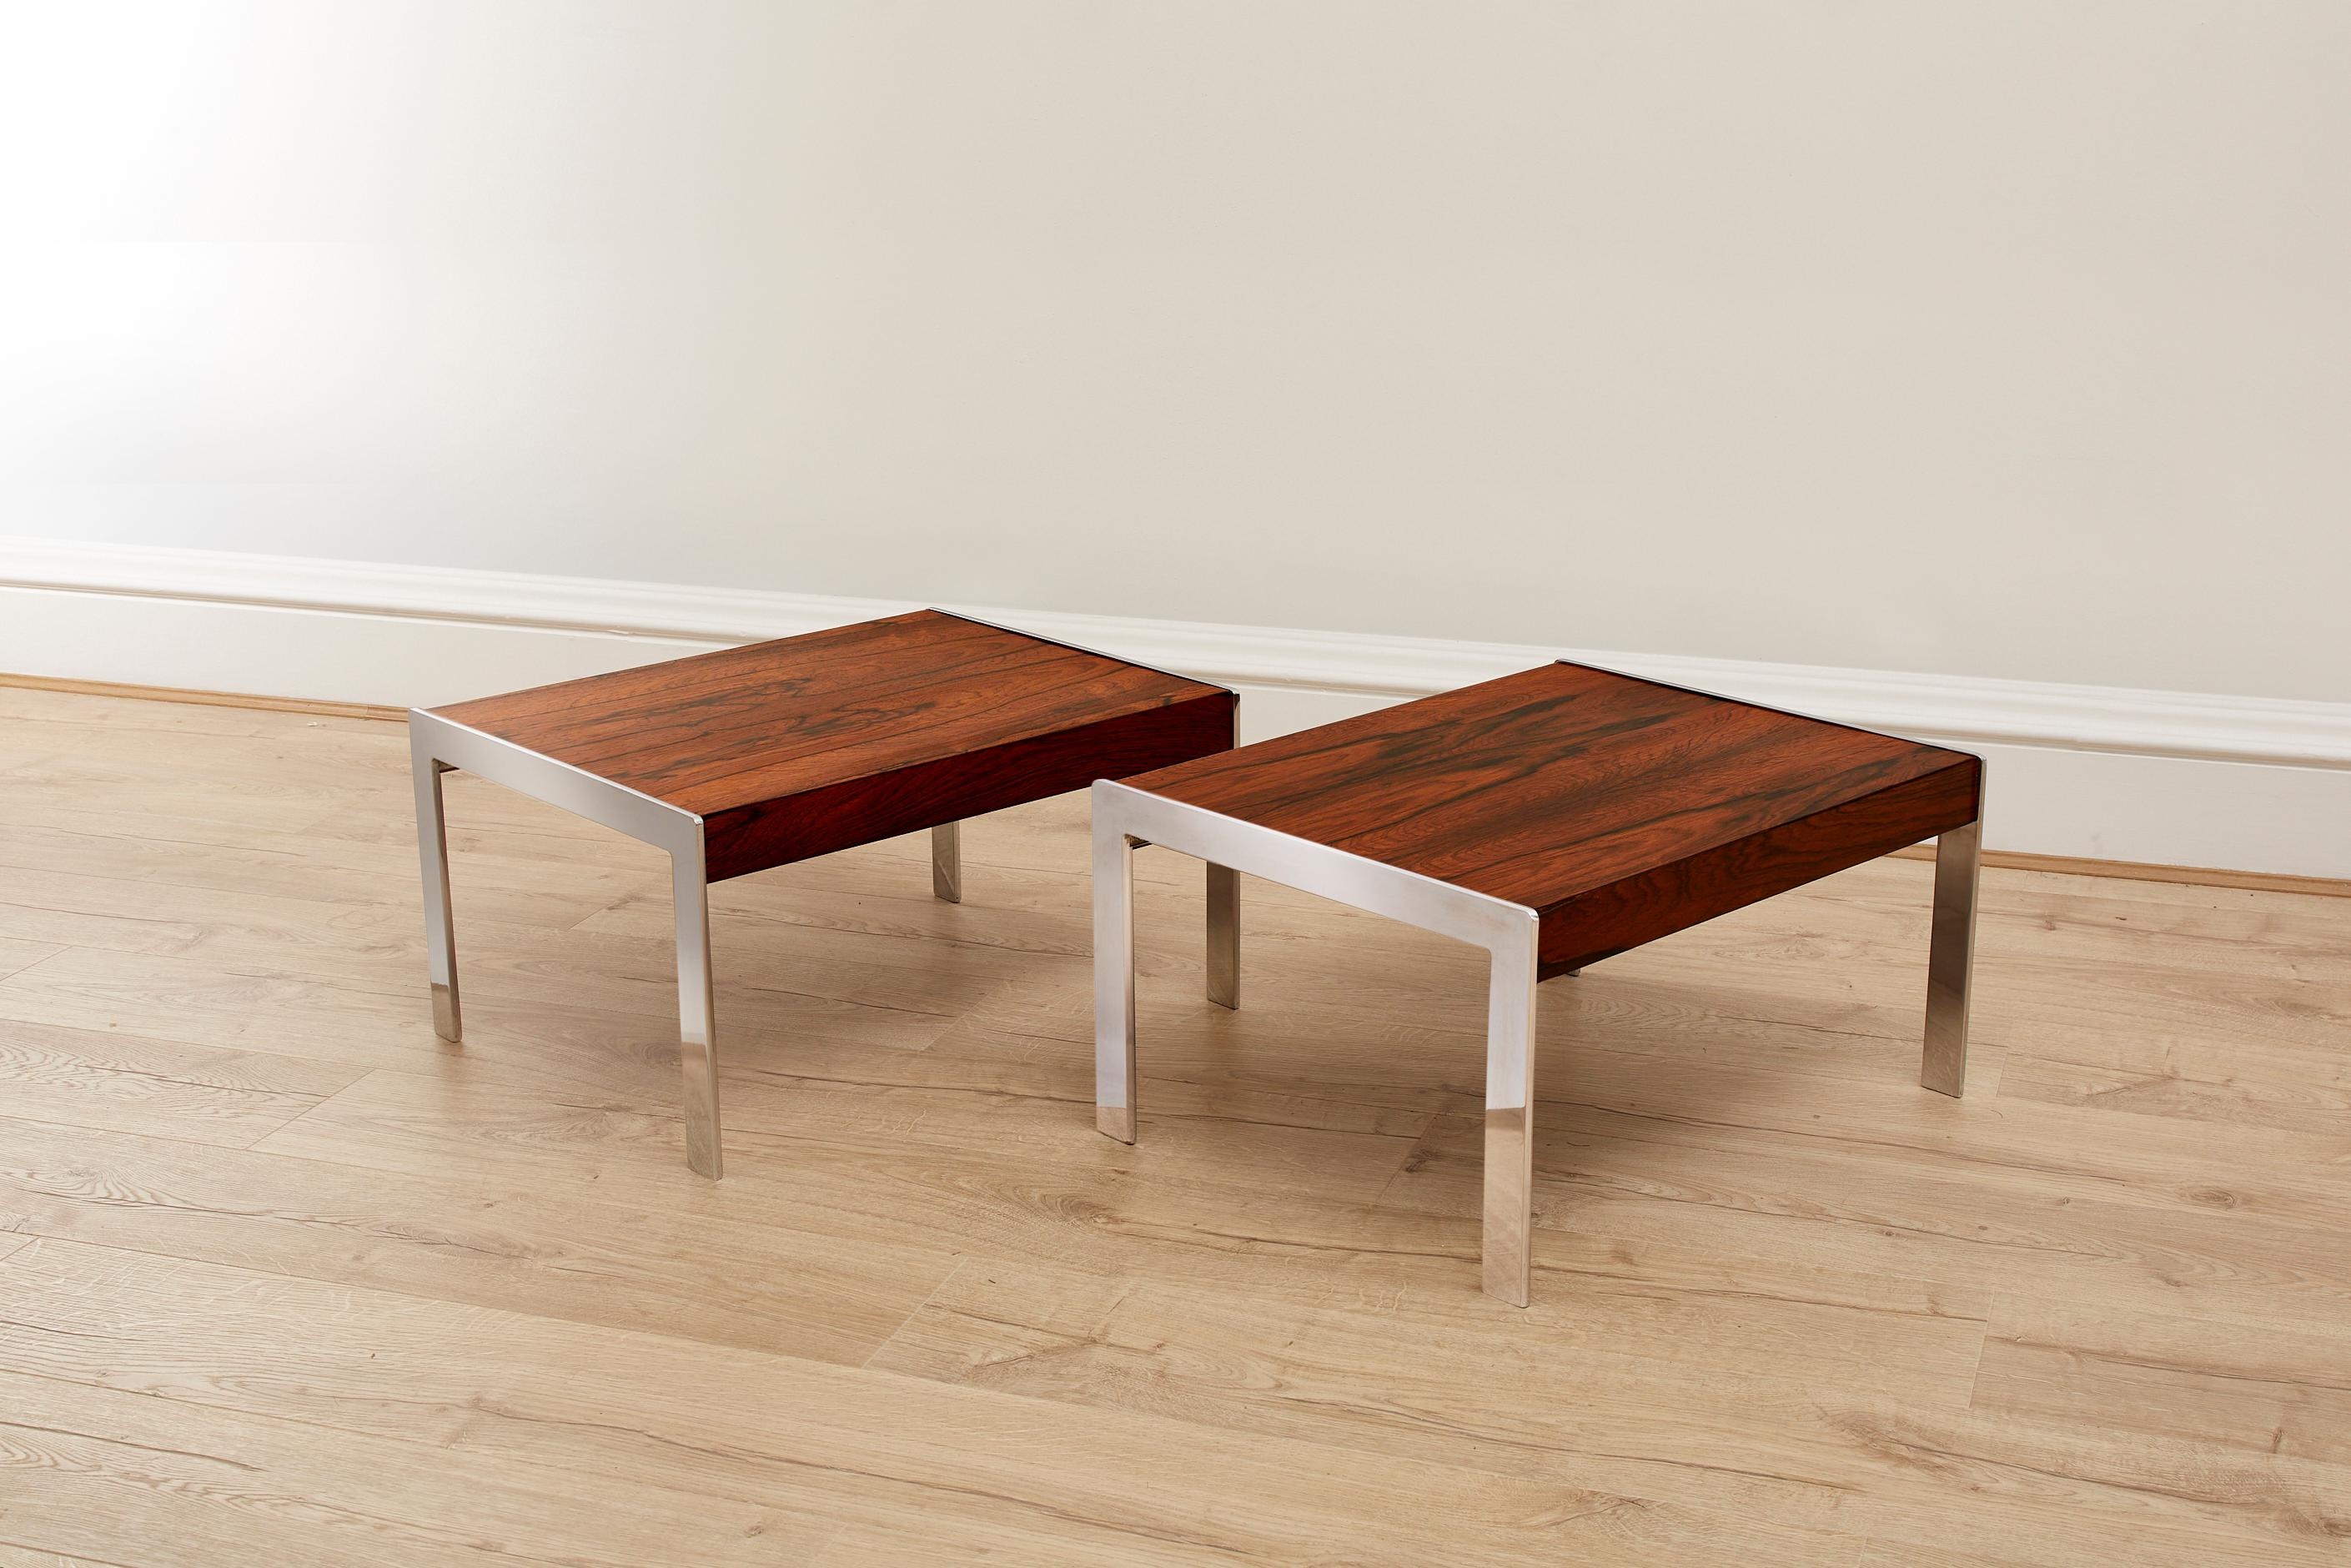 An exquisite pair of 1970s Merrow Associates Rosewood and Chrome Side Tables. 

Crafted with meticulous attention to detail, these tables seamlessly blend the warmth of rosewood with the modern appeal of chrome accents. 

Designed by Richard Young